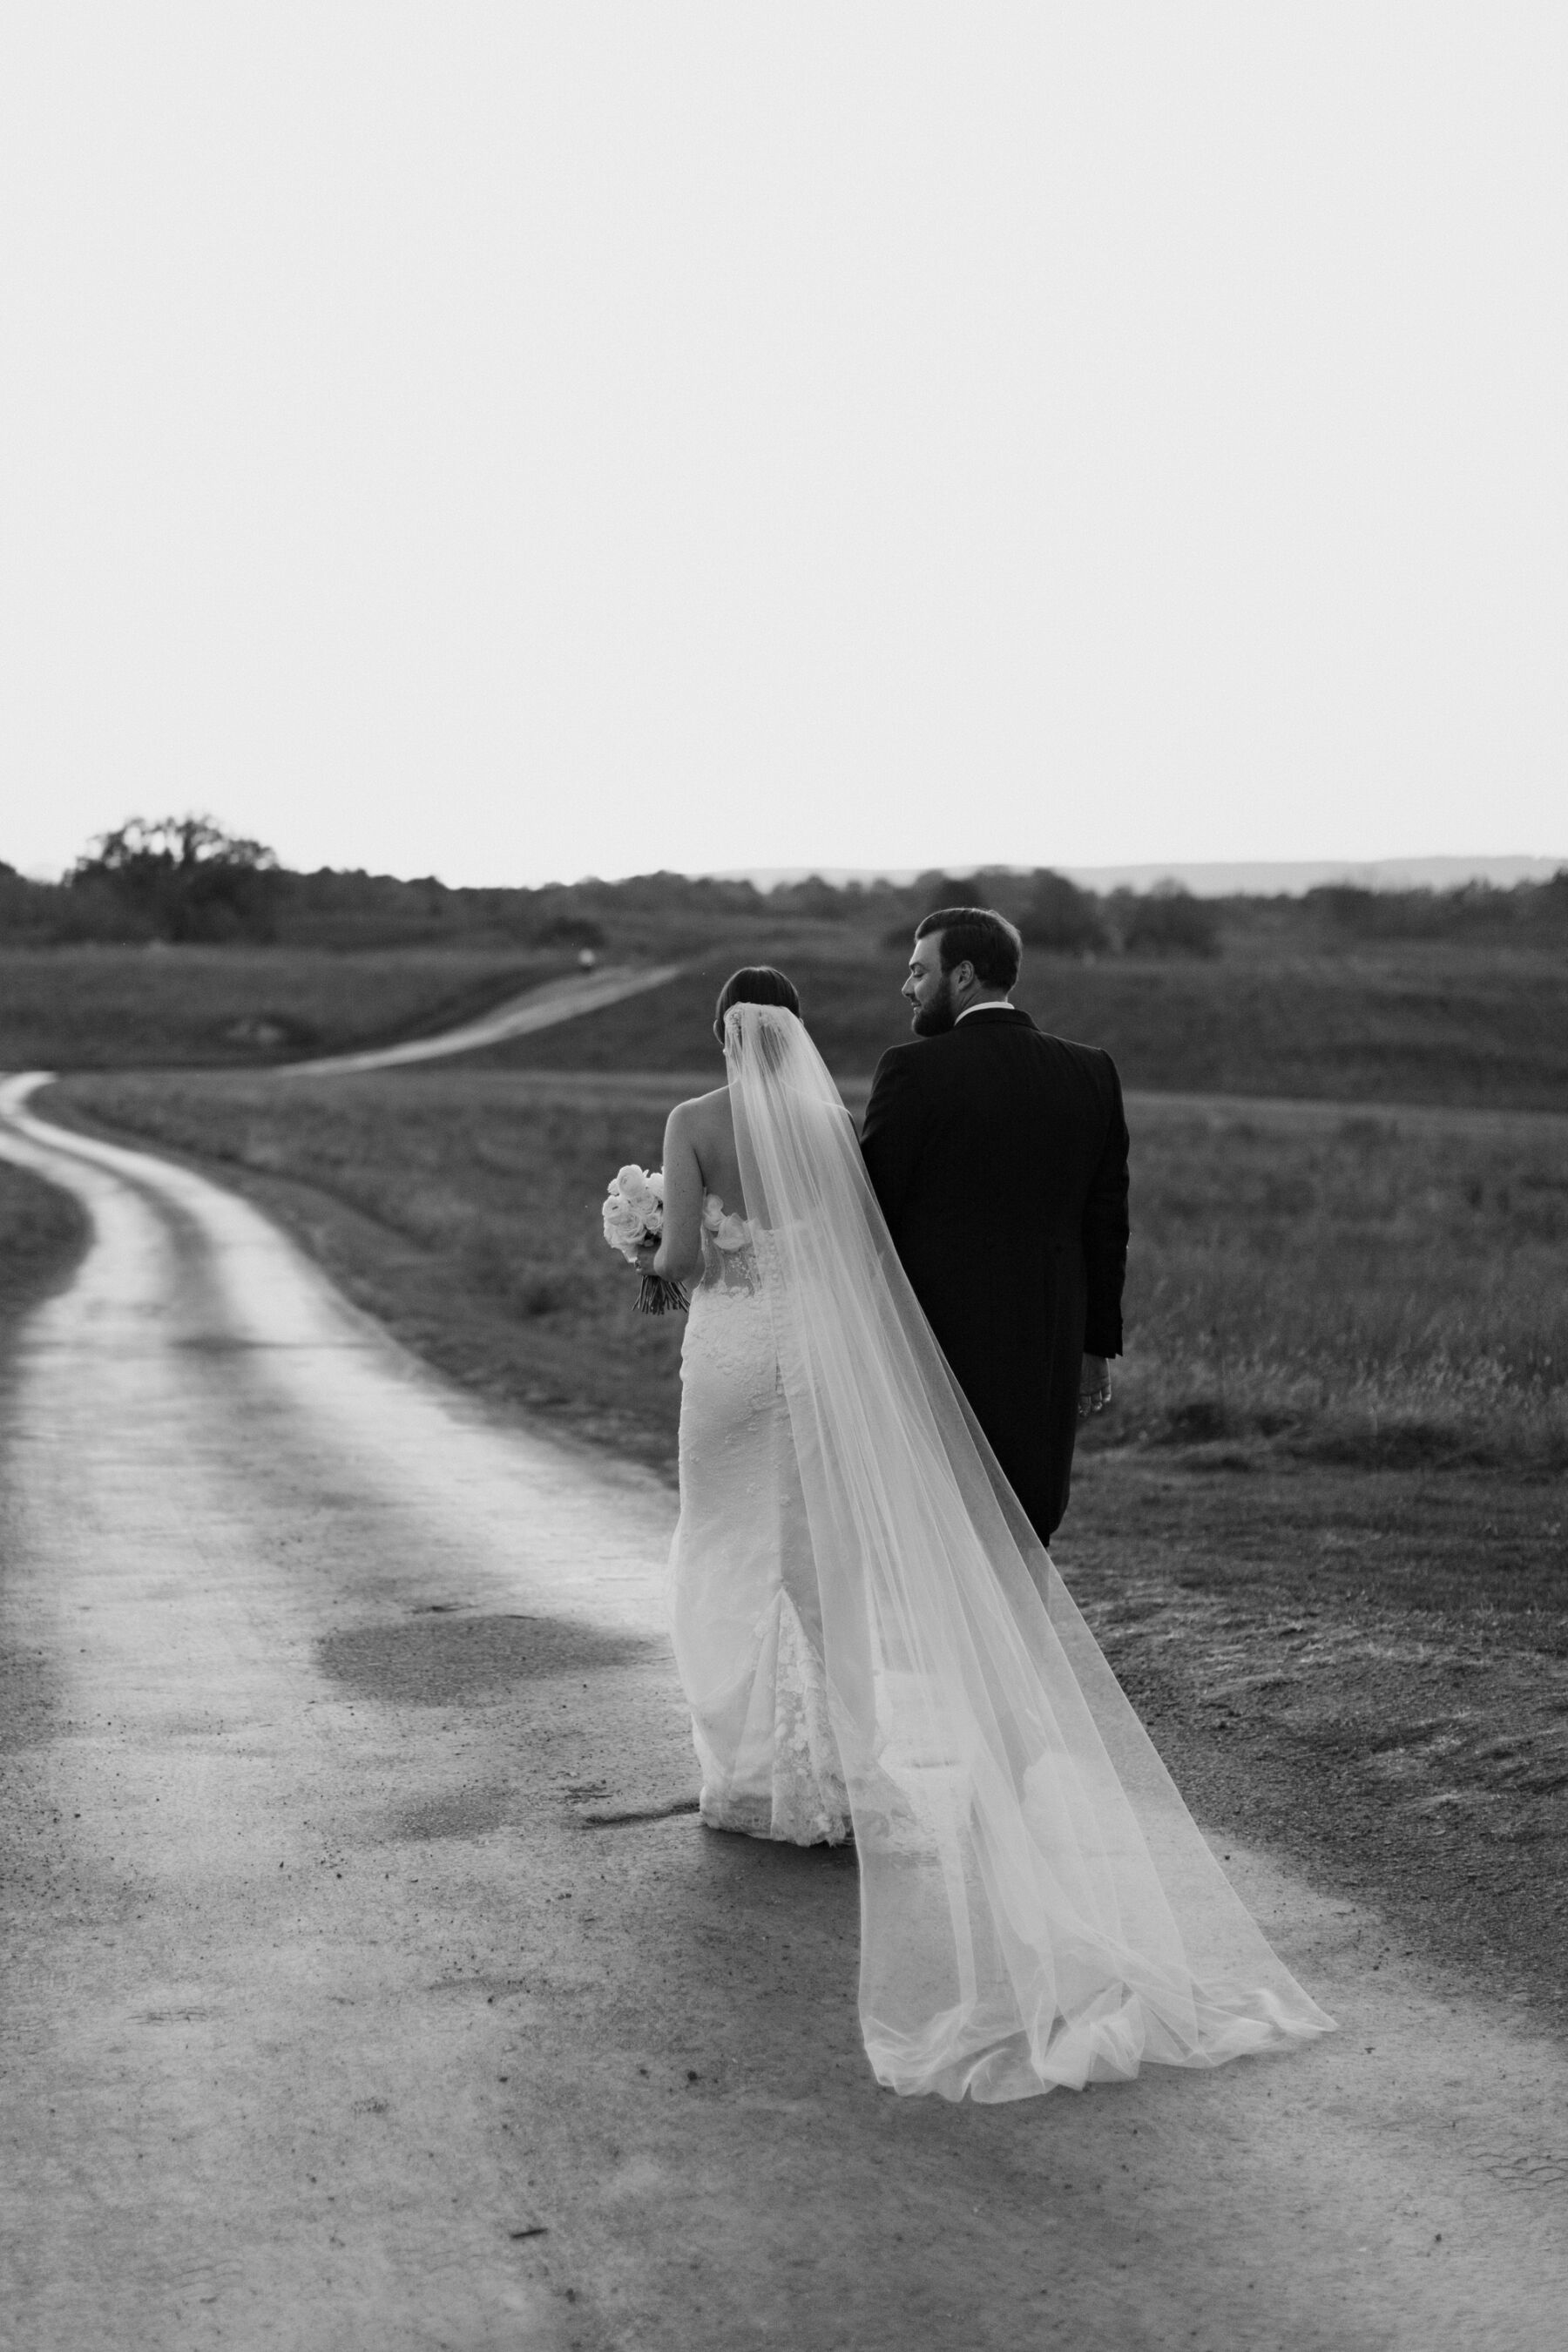 Shot behind of bride and groom walking along a path near fields. Brie wears a long wedding veil and carries a white bouquet. Groom wears traditional tails.